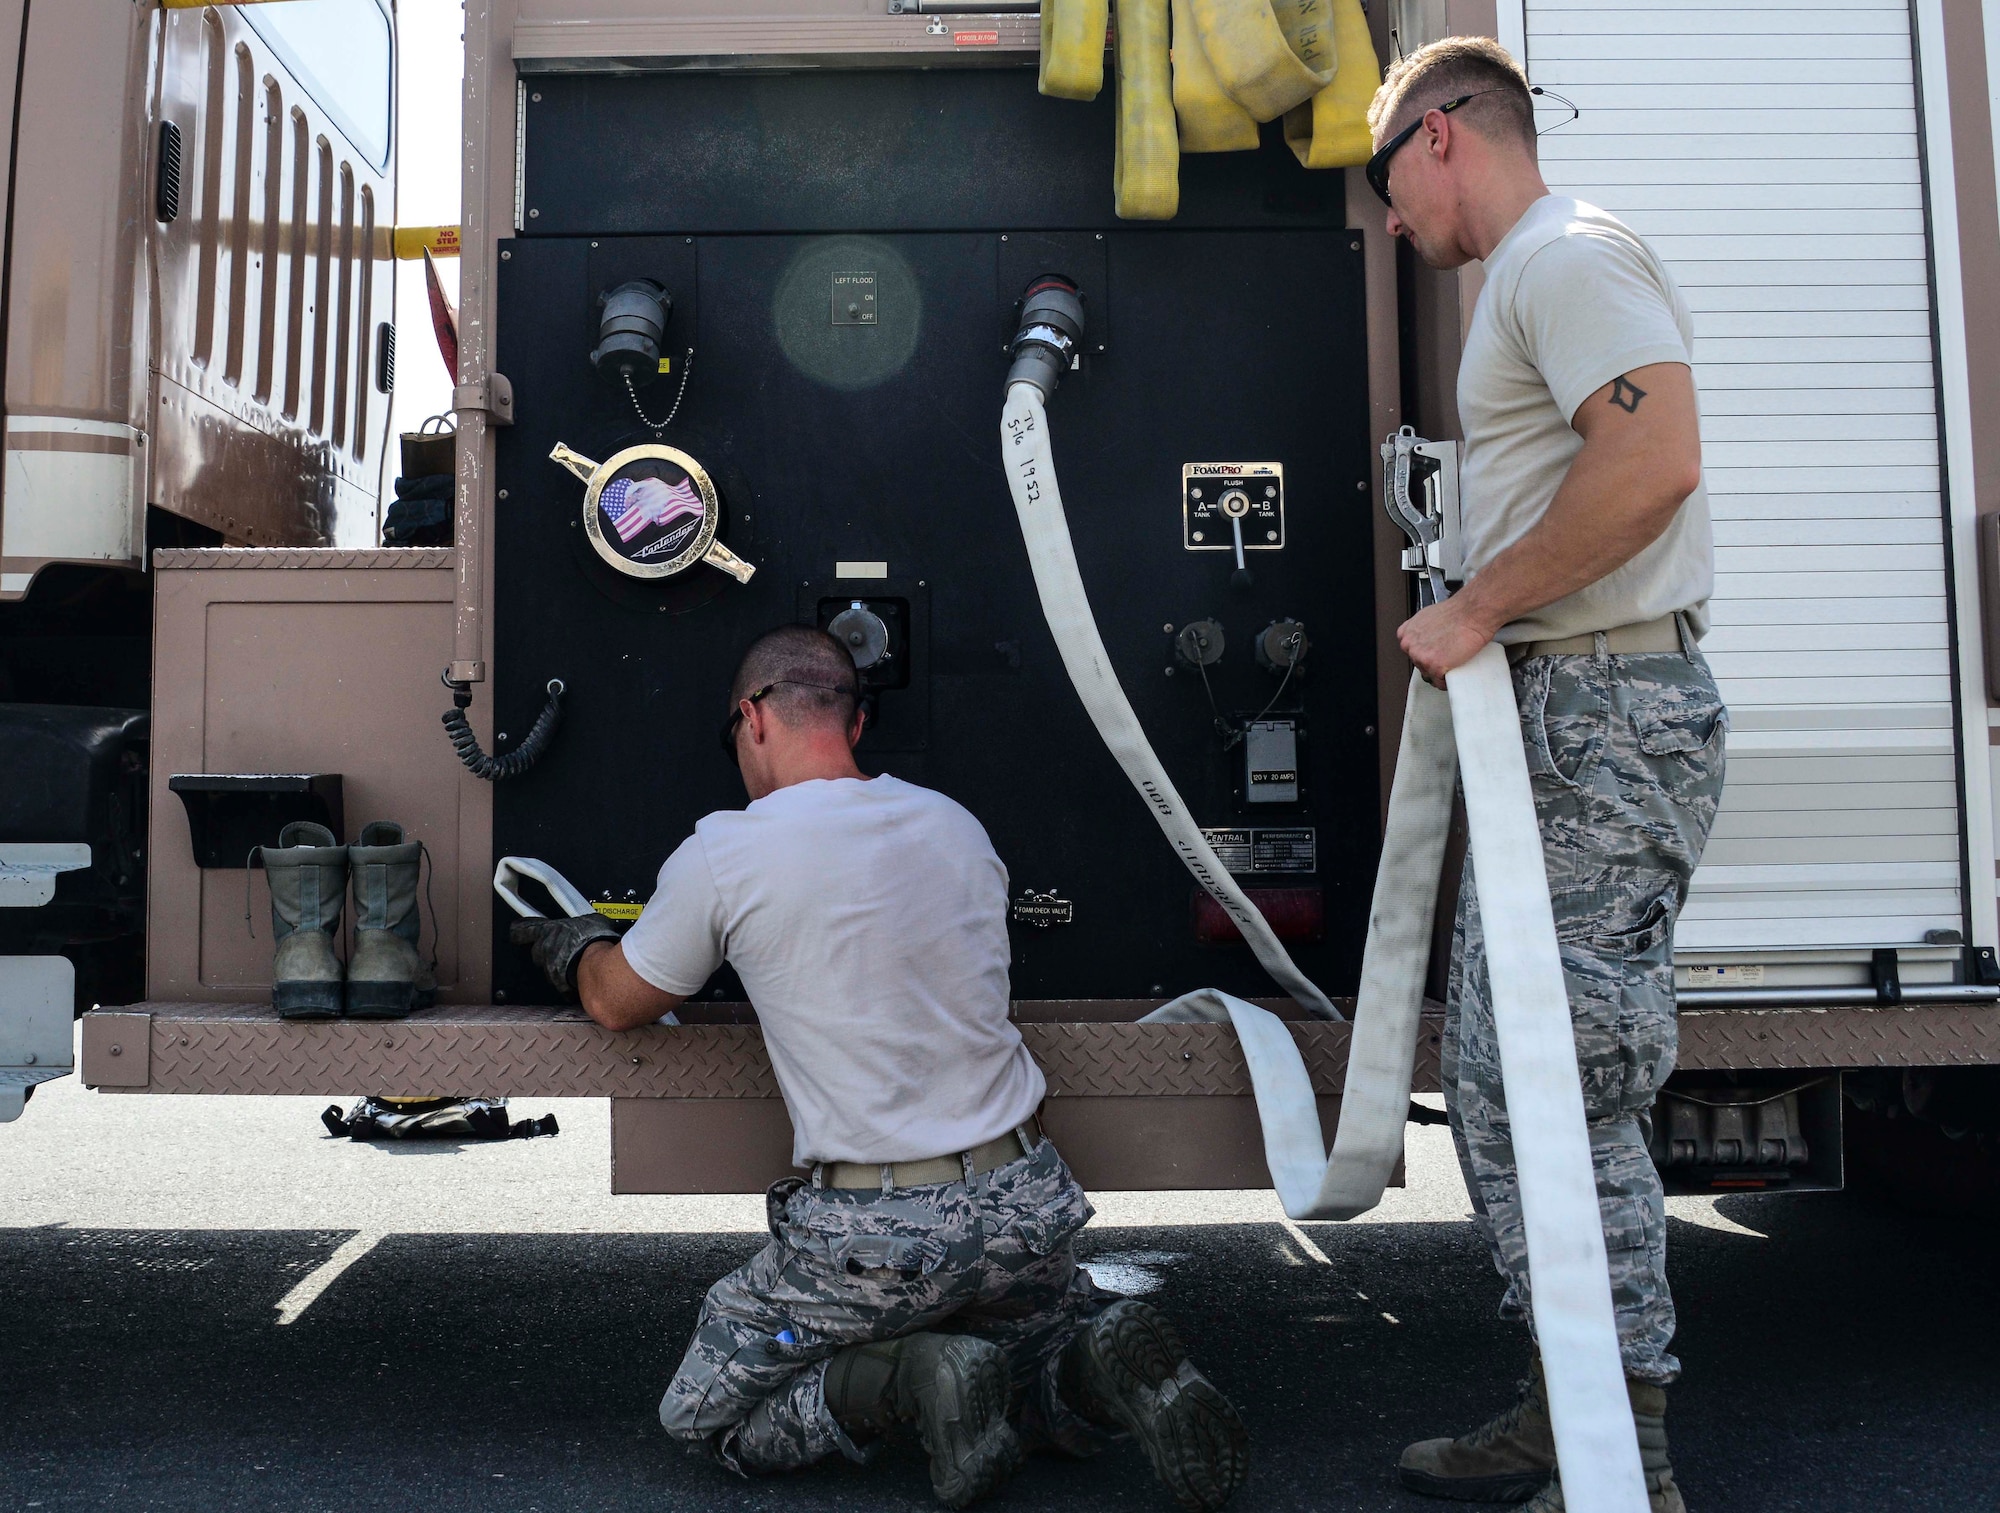 Staff Sgt. Gregory Mazzone, 379th Expeditionary Civil Engineer Squadron firefighter, and Tech. Sgt. Gabriel Boulware, 379th ECES crew chief, repack the 1 ¾-inch hand line from Engine 21 June 24, 2016, at Al Udeid Air Base, Qatar. Repacking a hand line requires certain hose lines loaded in specific ways for different situations. Ensuring the hose is placed back on the Engine 21 correctly is critical to its rapid deployment at the next emergency where it is needed. (U.S. Air Force photo/Senior Airman Janelle Patiño/Released)